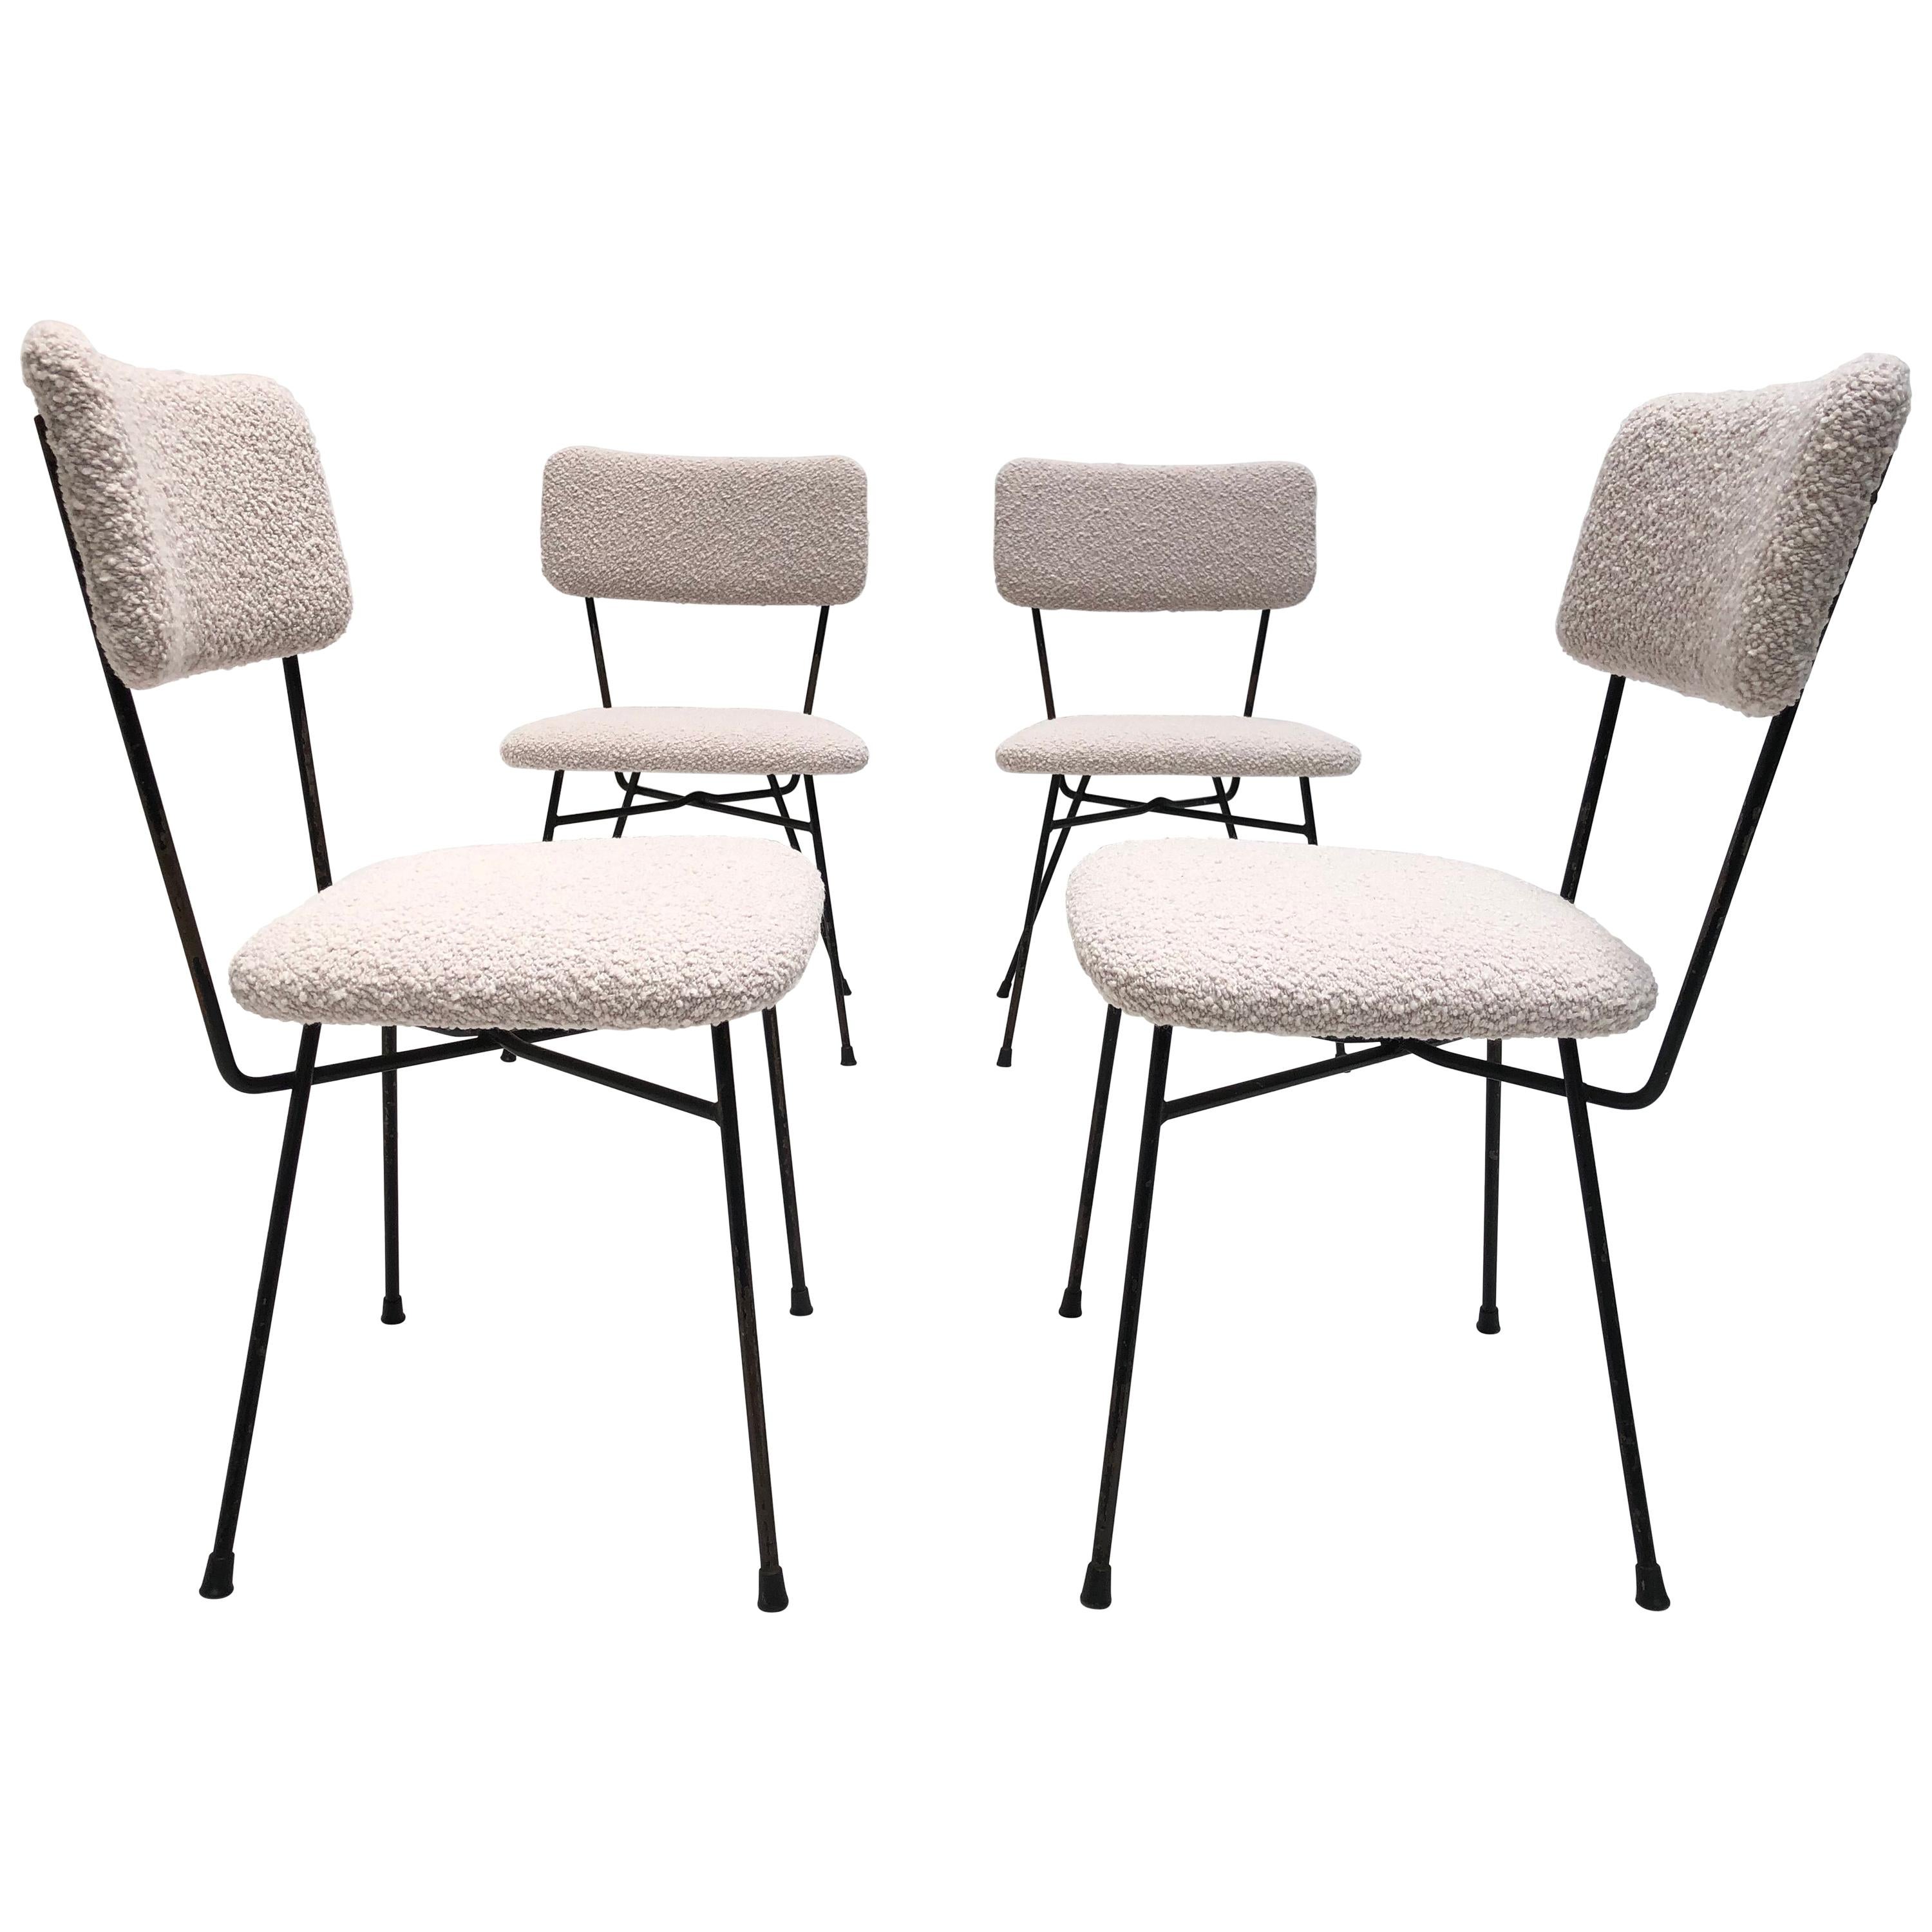 4 Dining Chairs by Pizzetti Rome Italy 1950s, New Wool Boucle Upholstery For Sale